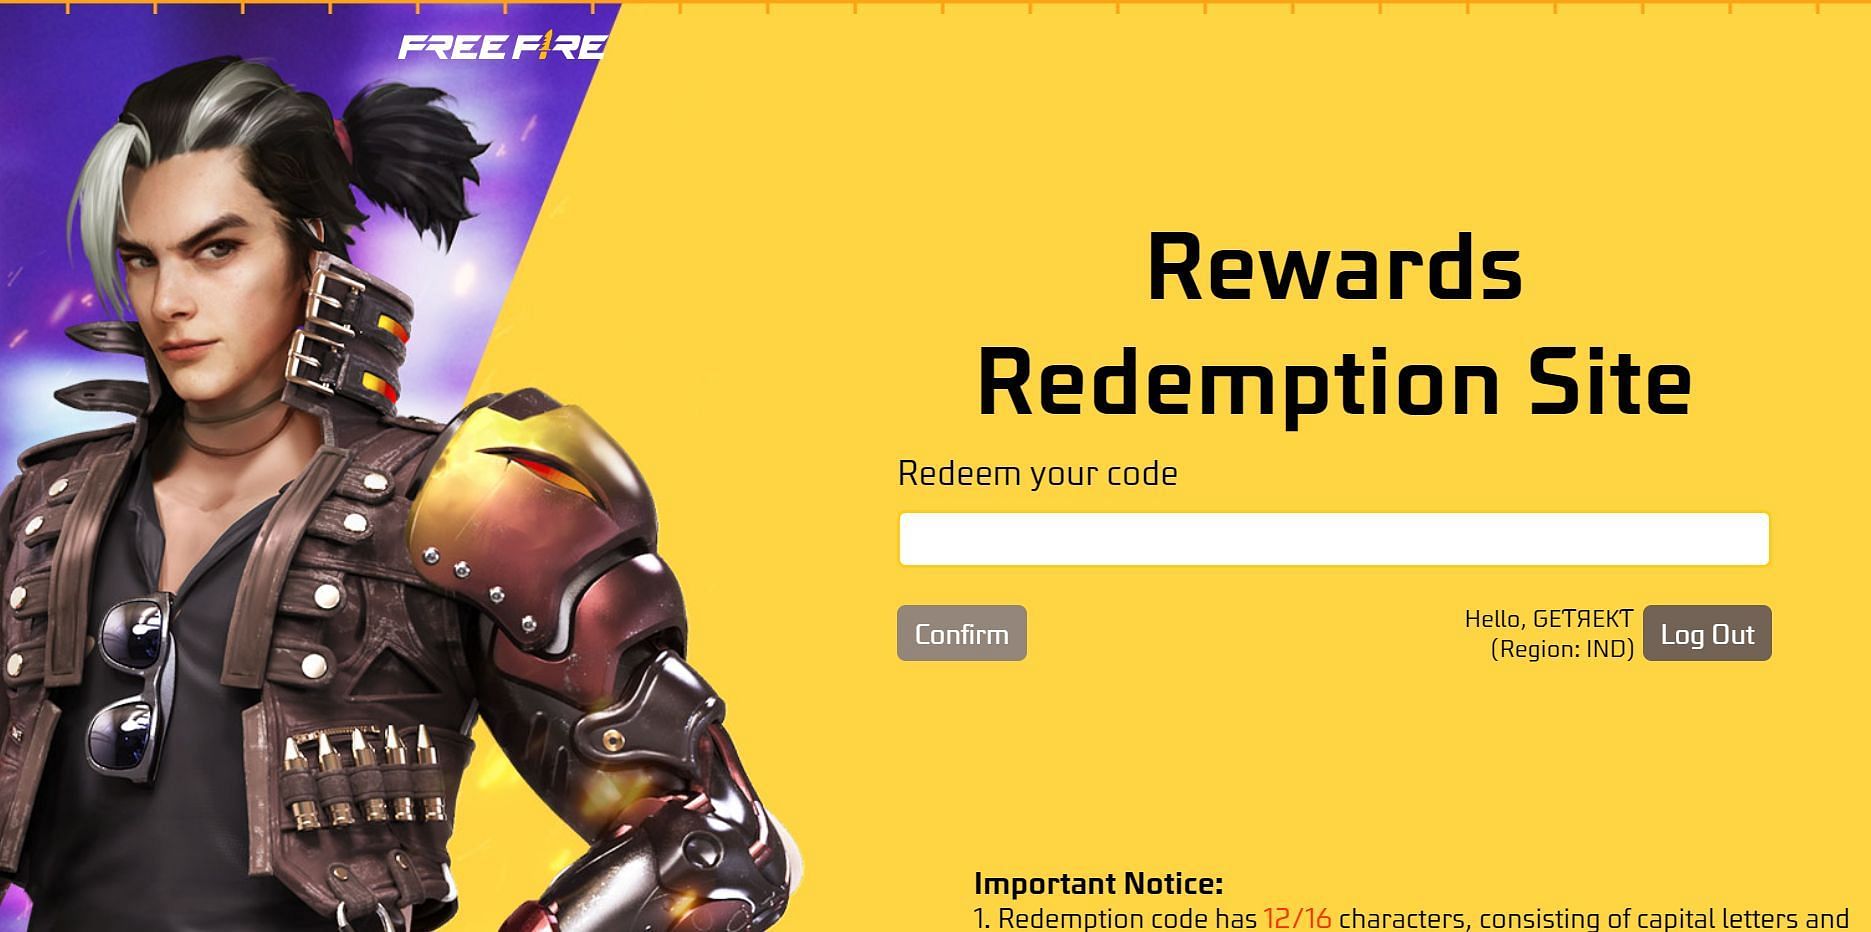 After entering the code, press the confirm button, and the redemption will be complete (Image via Garena)